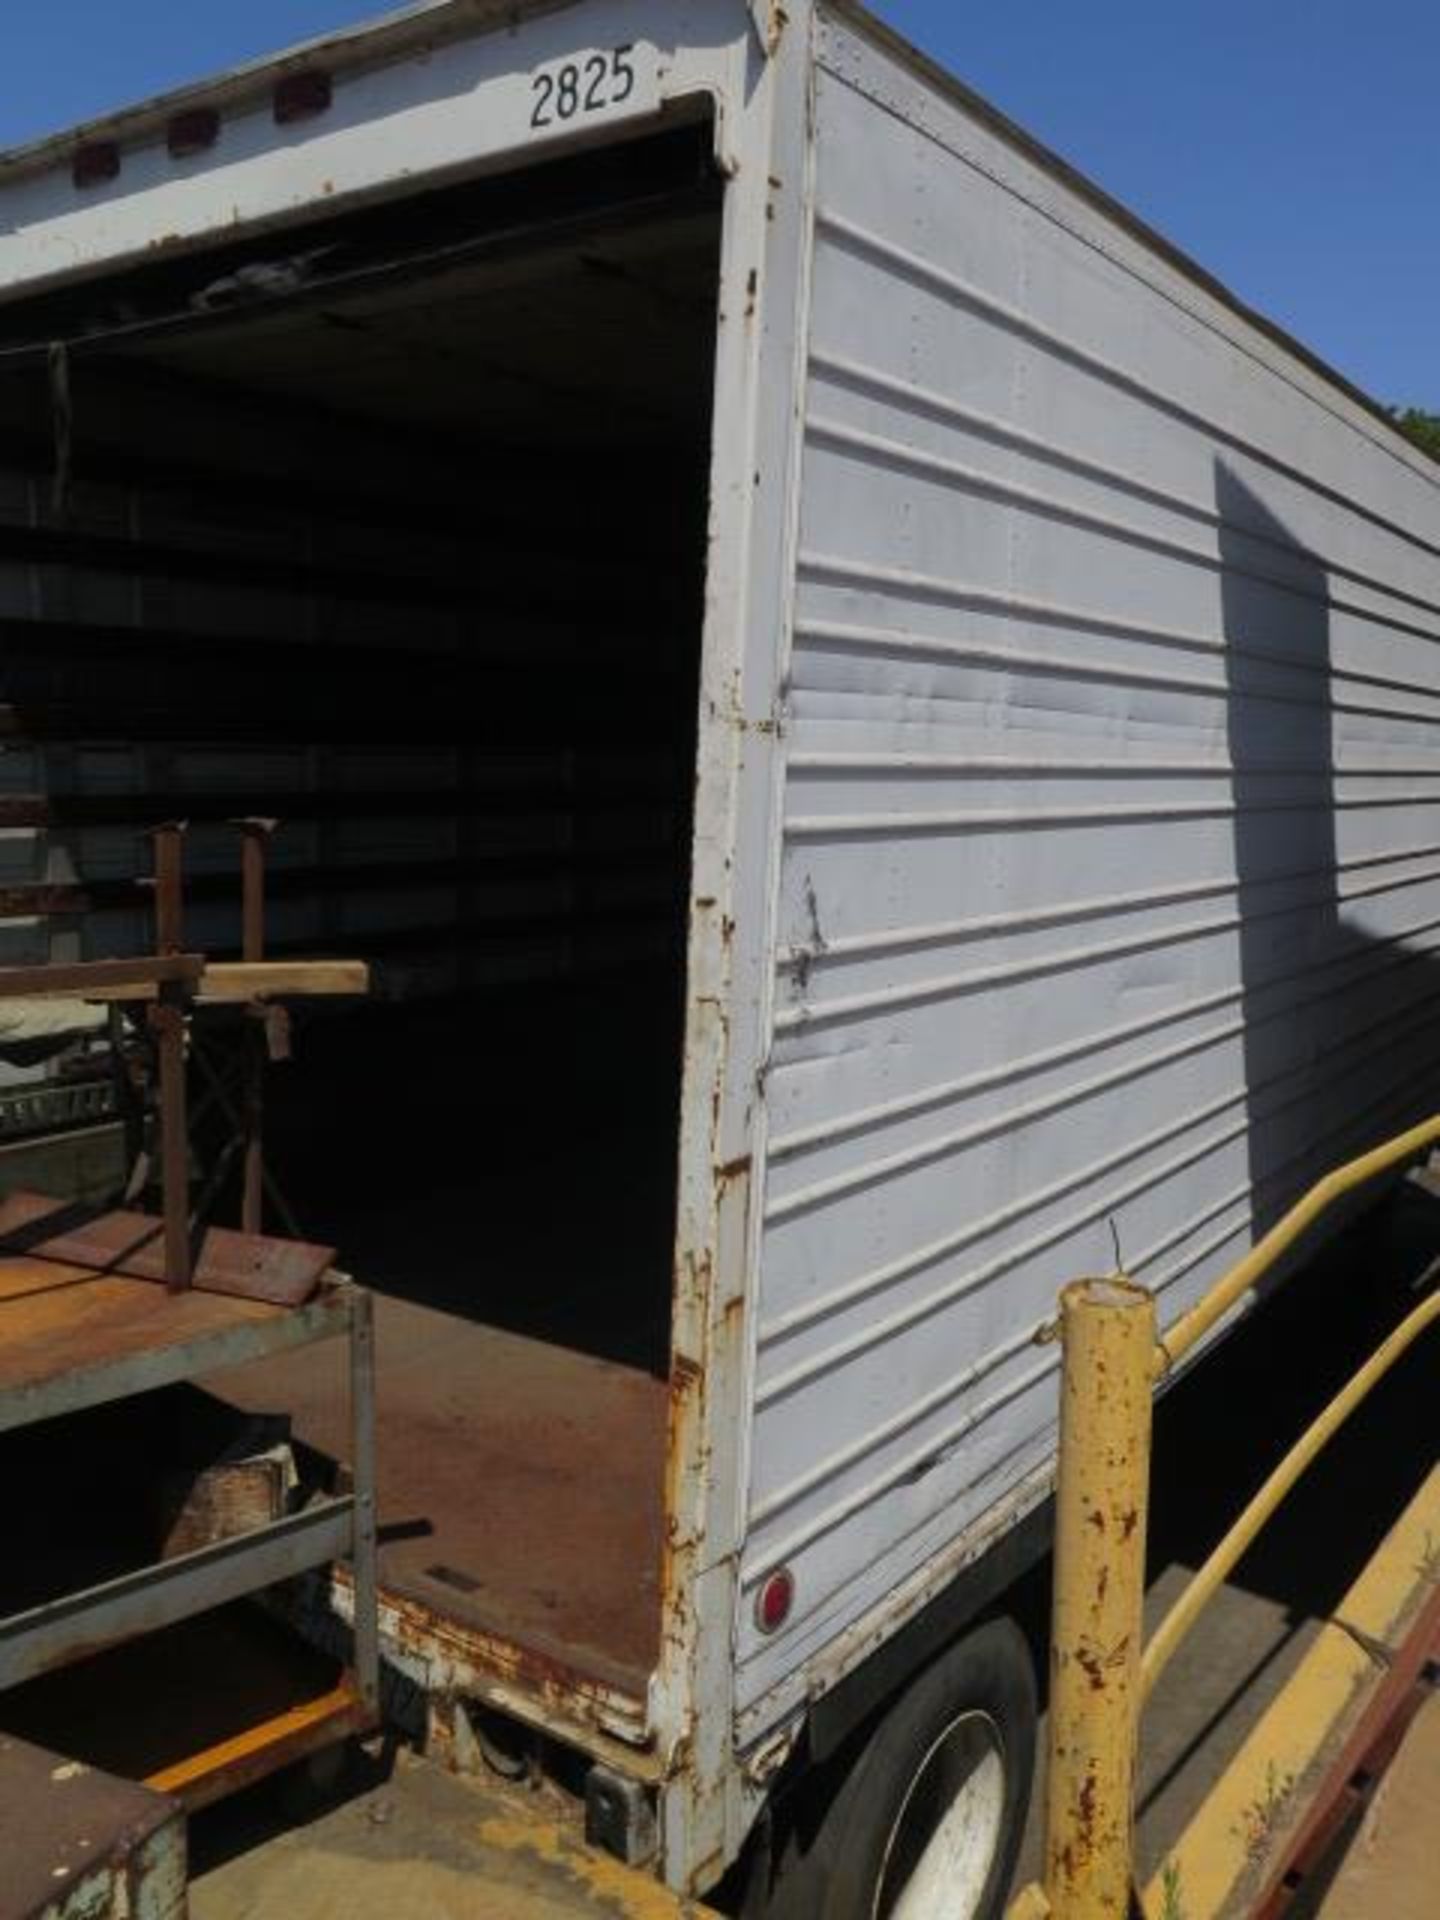 20' Trailer (SOLD AS STORAGE CONTAINER) (SOLD AS-IS - NO WARRANTY) - Image 2 of 5